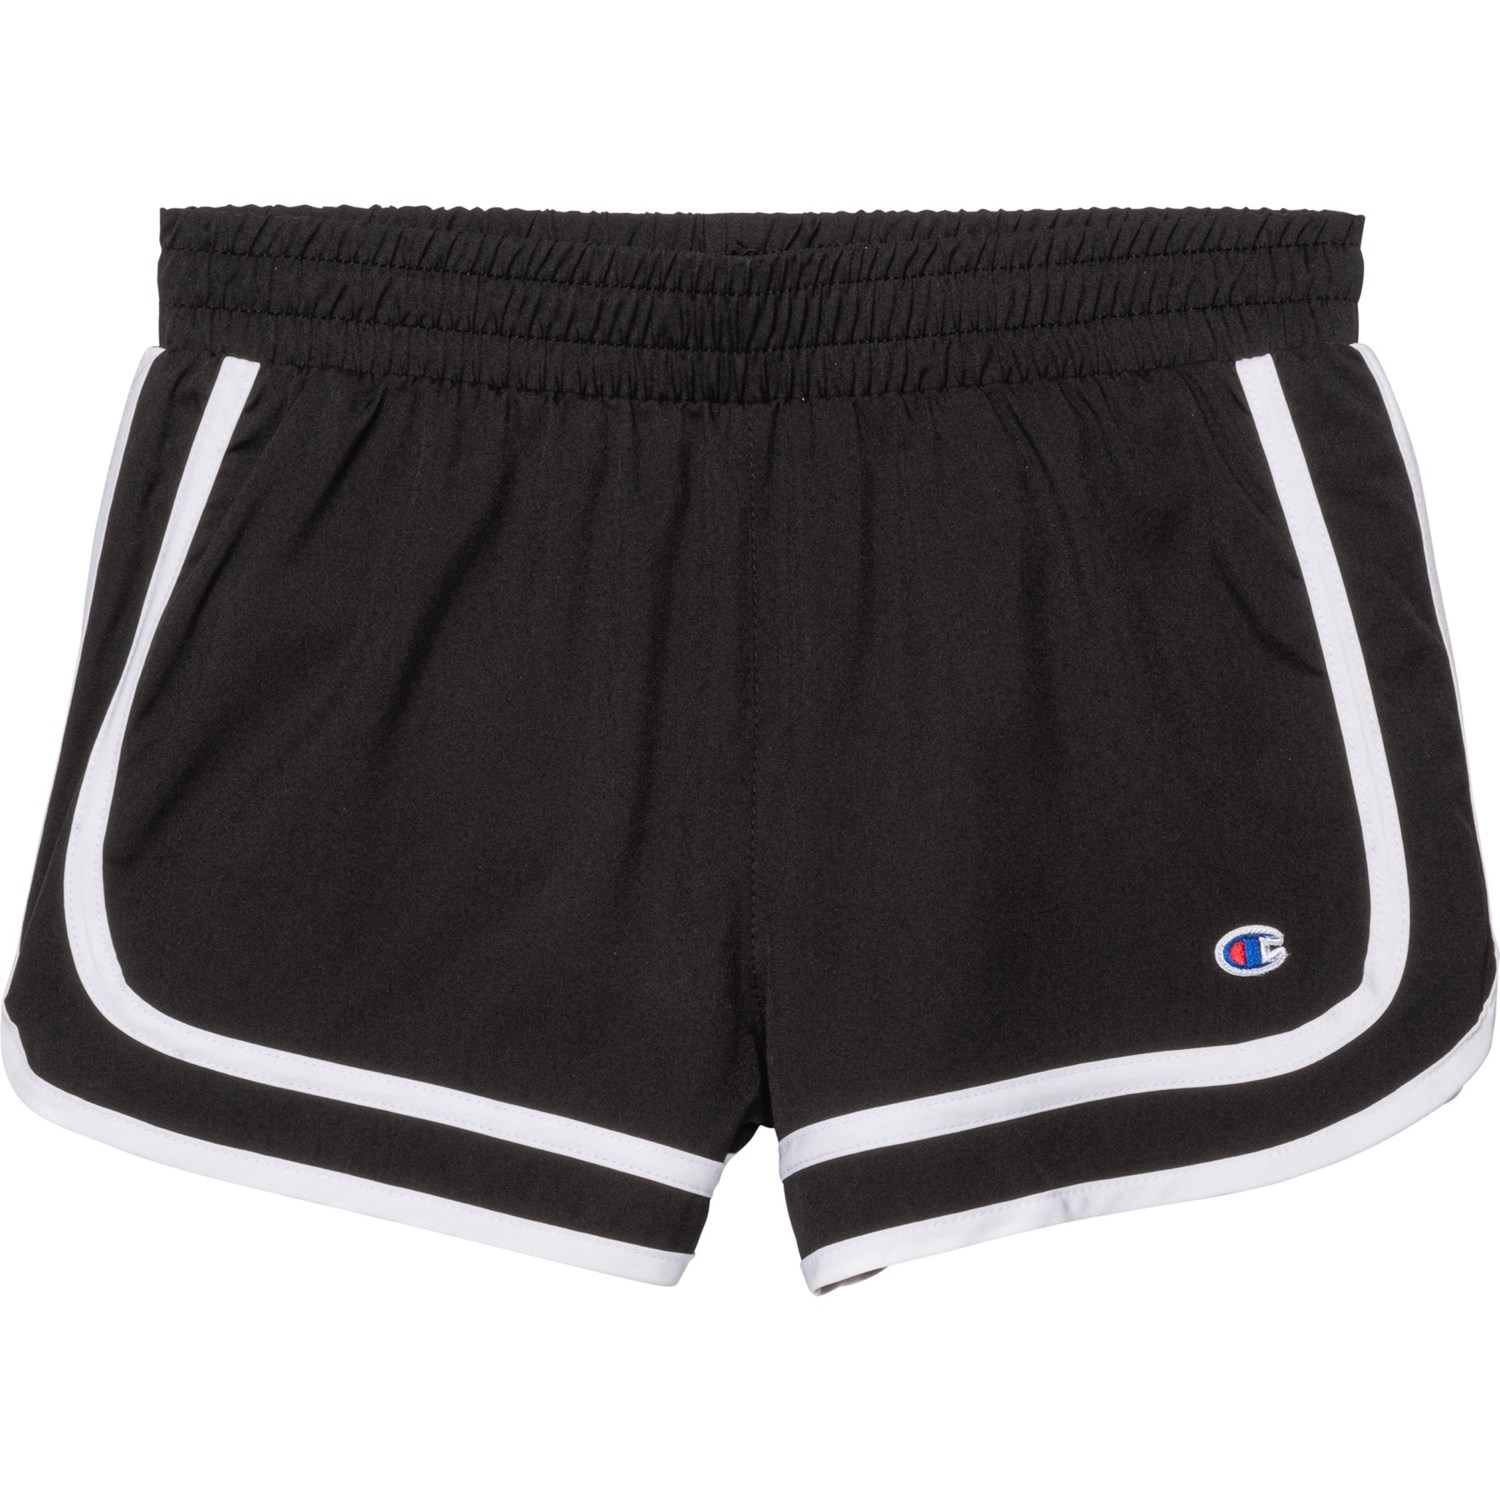 Champion Big Girls Solid Woven Shorts - Built-In Briefs